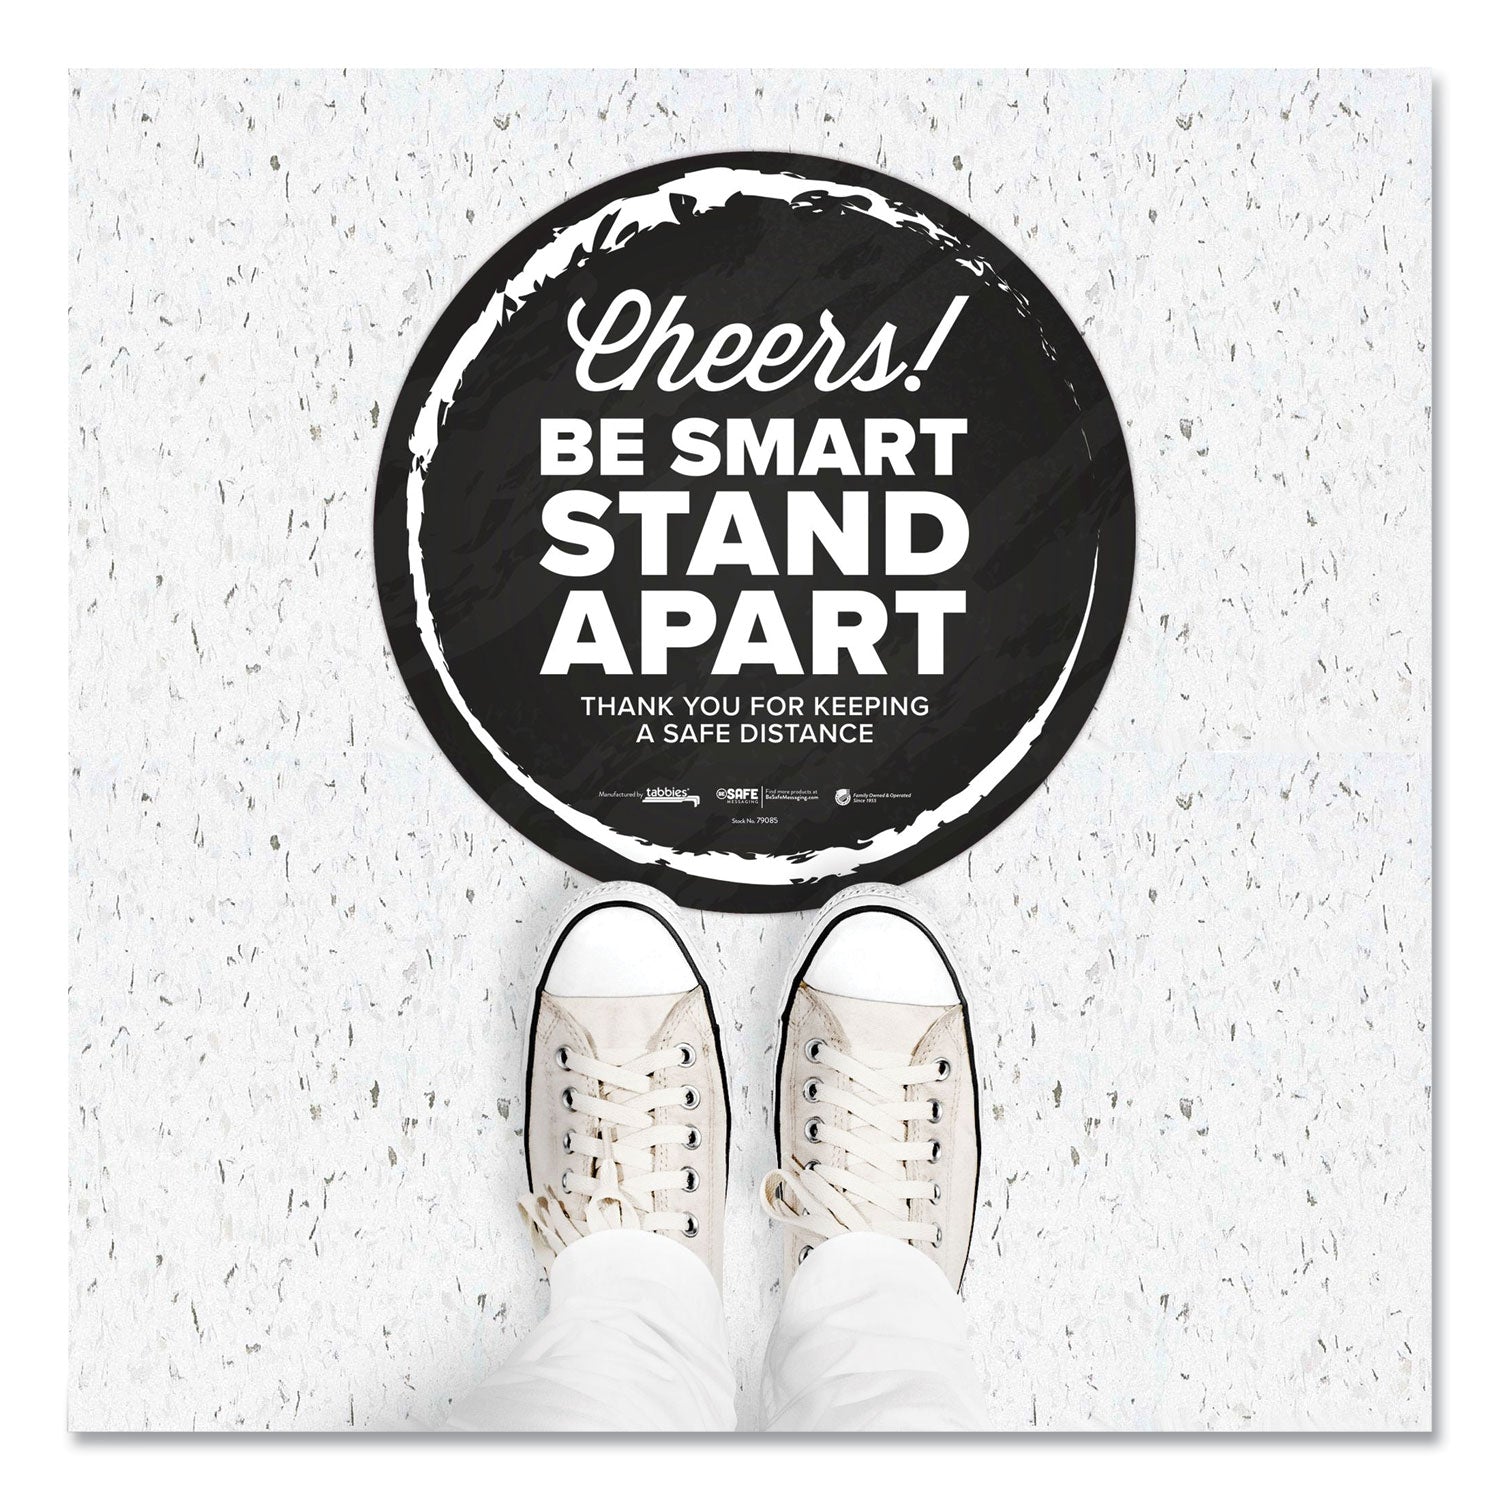 besafe-messaging-floor-decals-cheers;be-smart-stand-apart;thank-you-for-keeping-a-safe-distance-12-dia-black-white-60-ct_tab79185 - 3